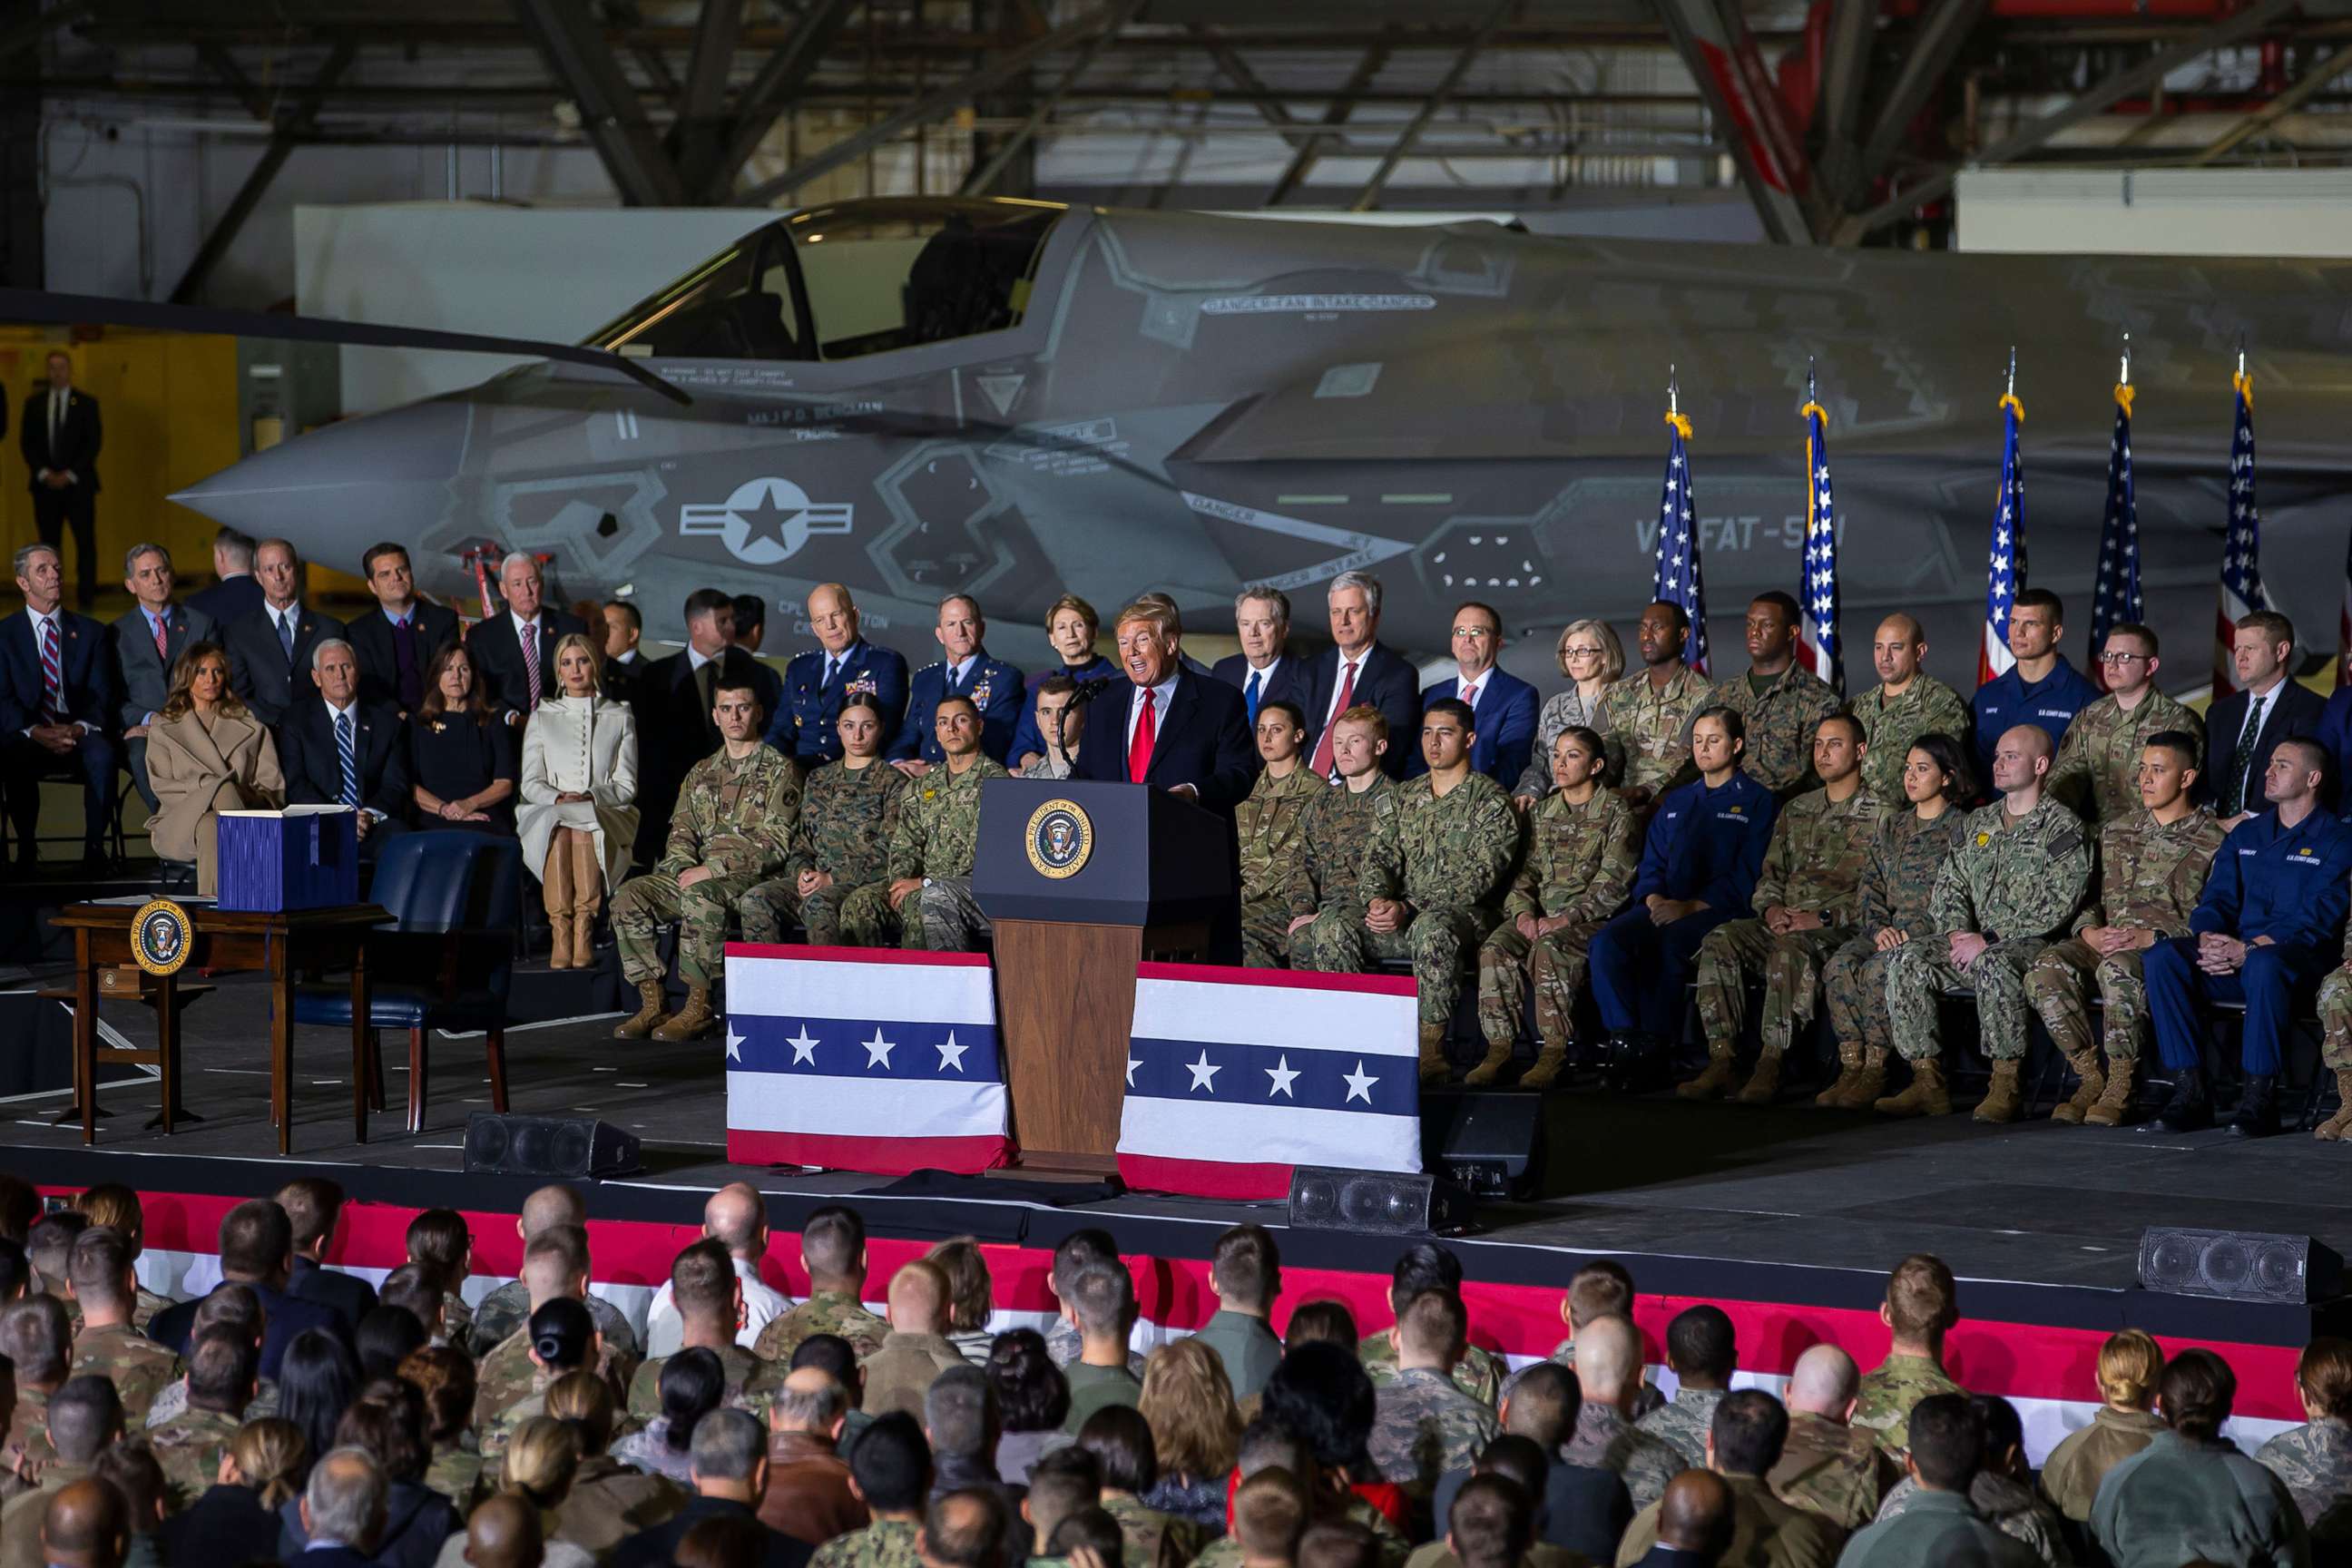 PHOTO: President Donald J. Trump speaks on stage during the signing ceremony for the National Defense Authorization Act for Fiscal Year 2020 inside Hangar Six at Joint Base Andrews in Suitland, M.D., Dec. 20, 2019.